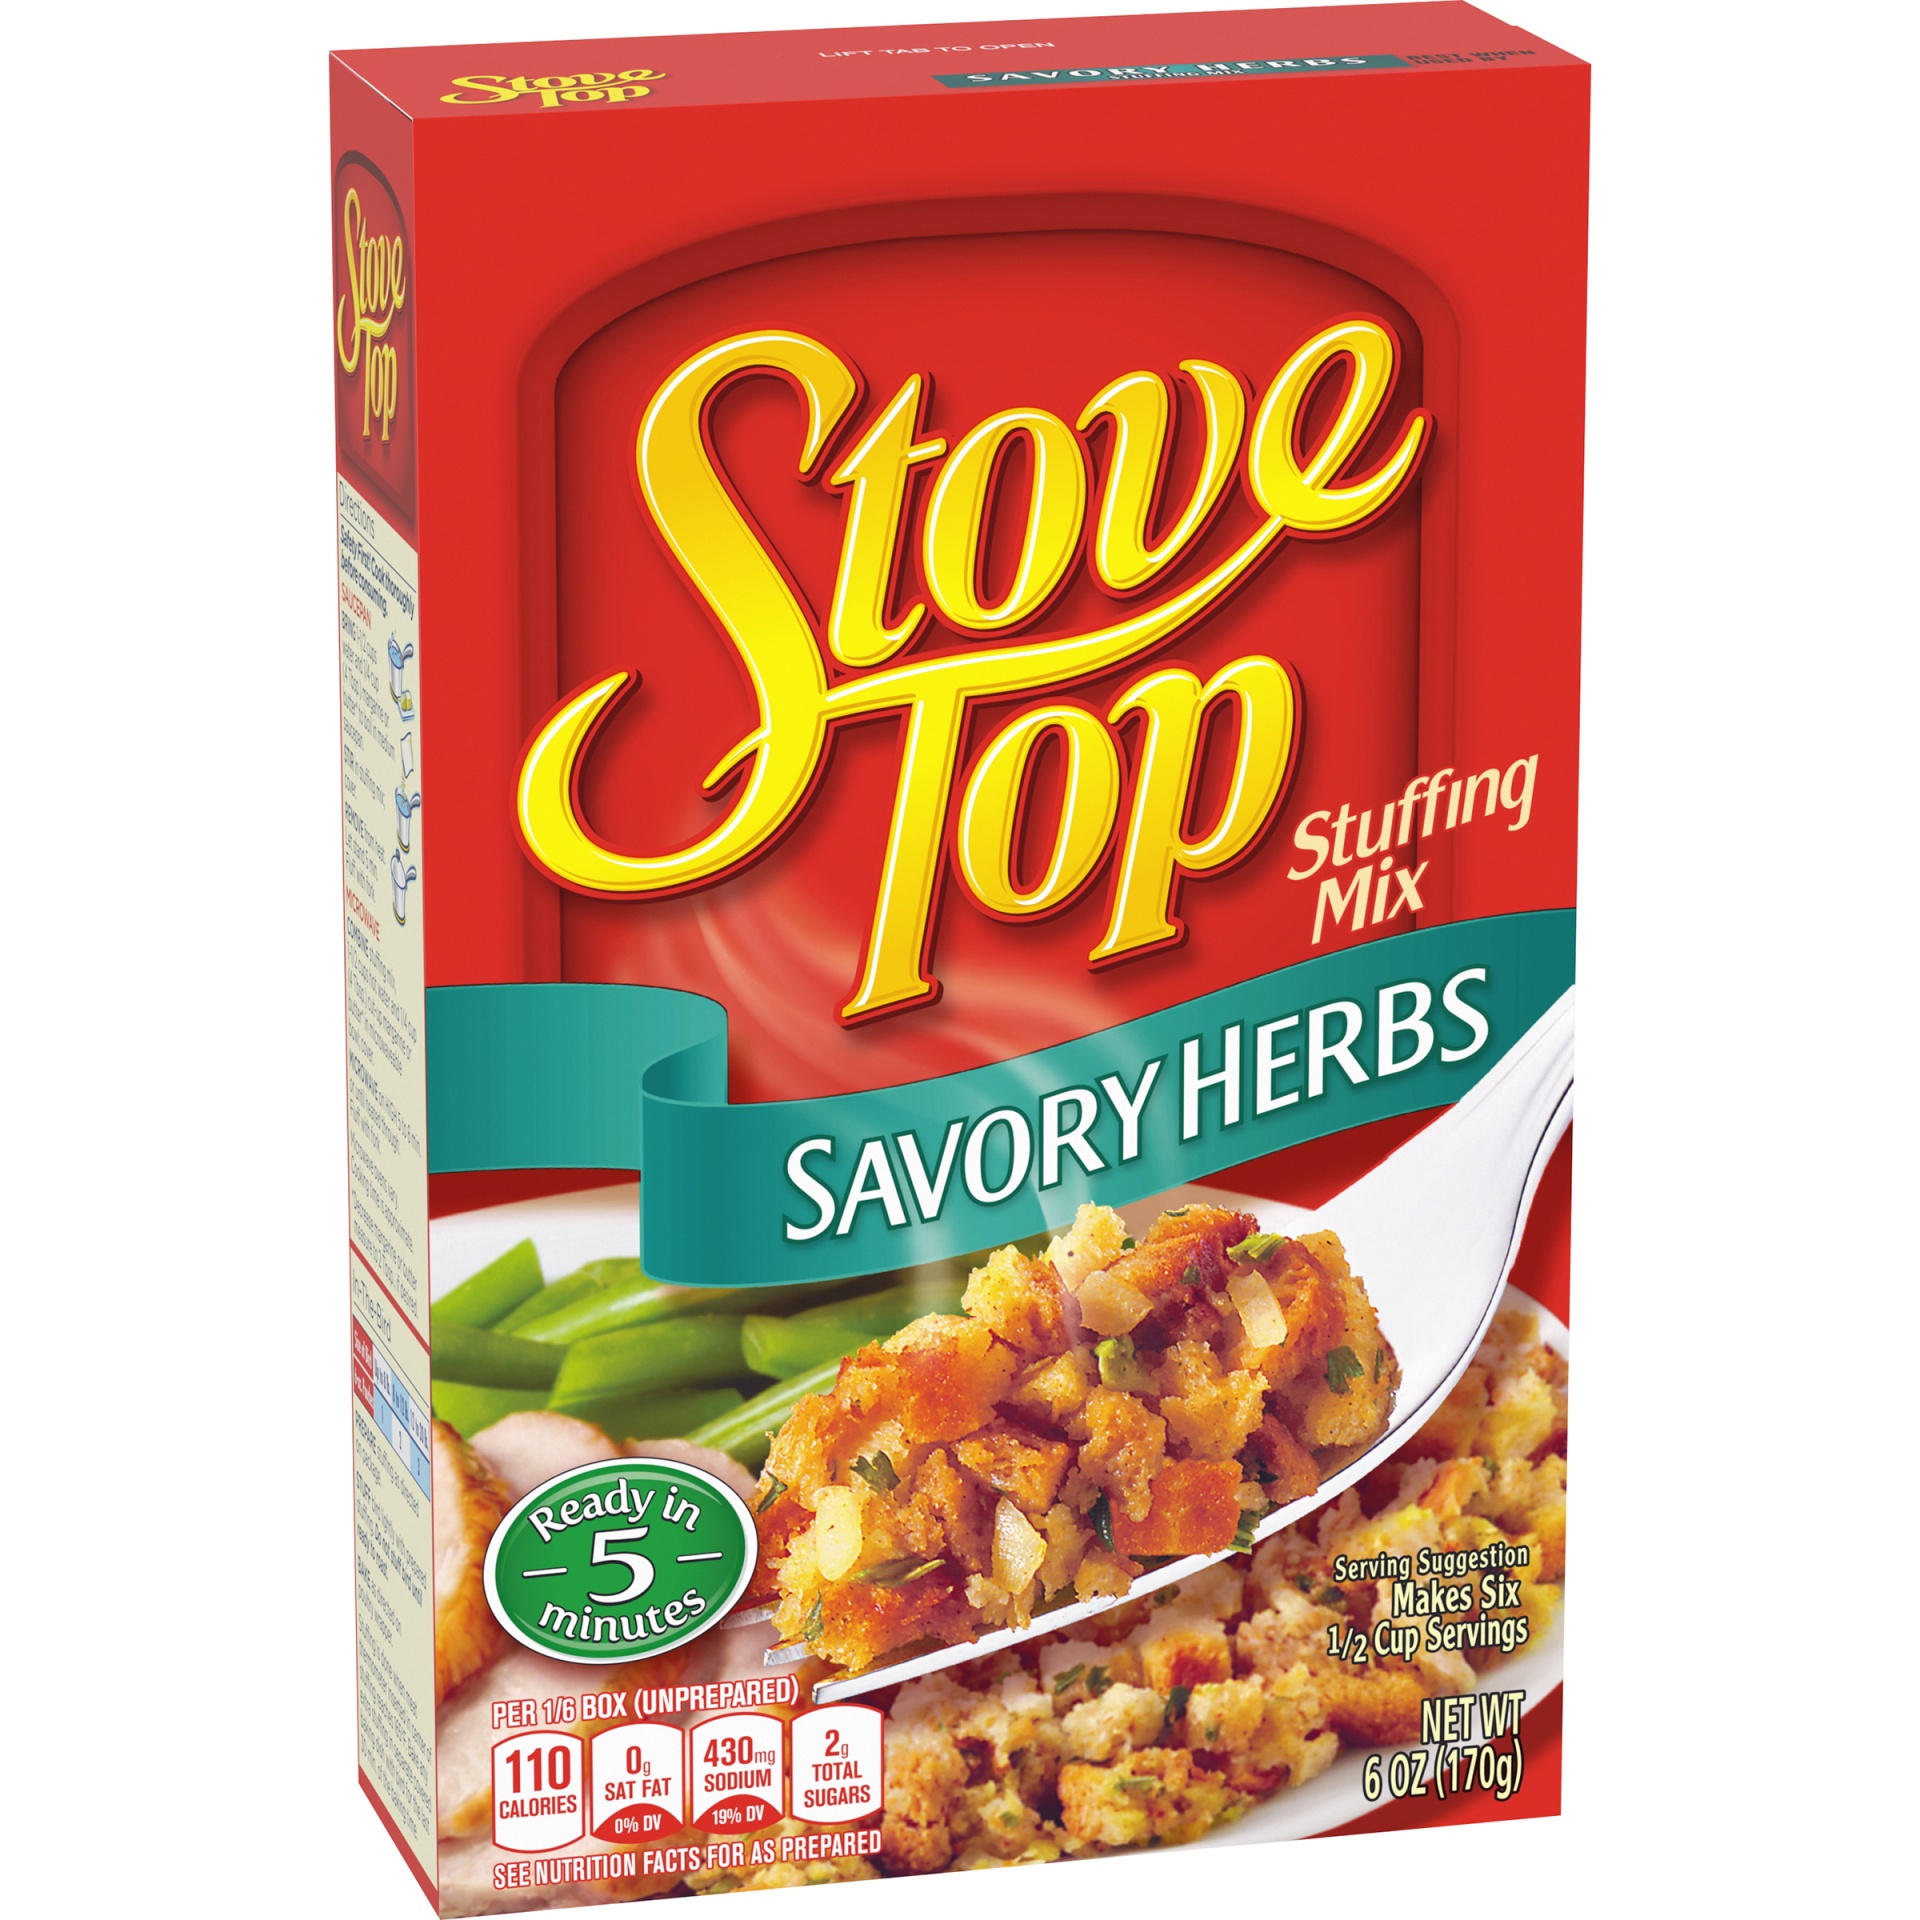 slide 5 of 9, Stove Top Savory Herbs Stuffing Mix, 6 oz